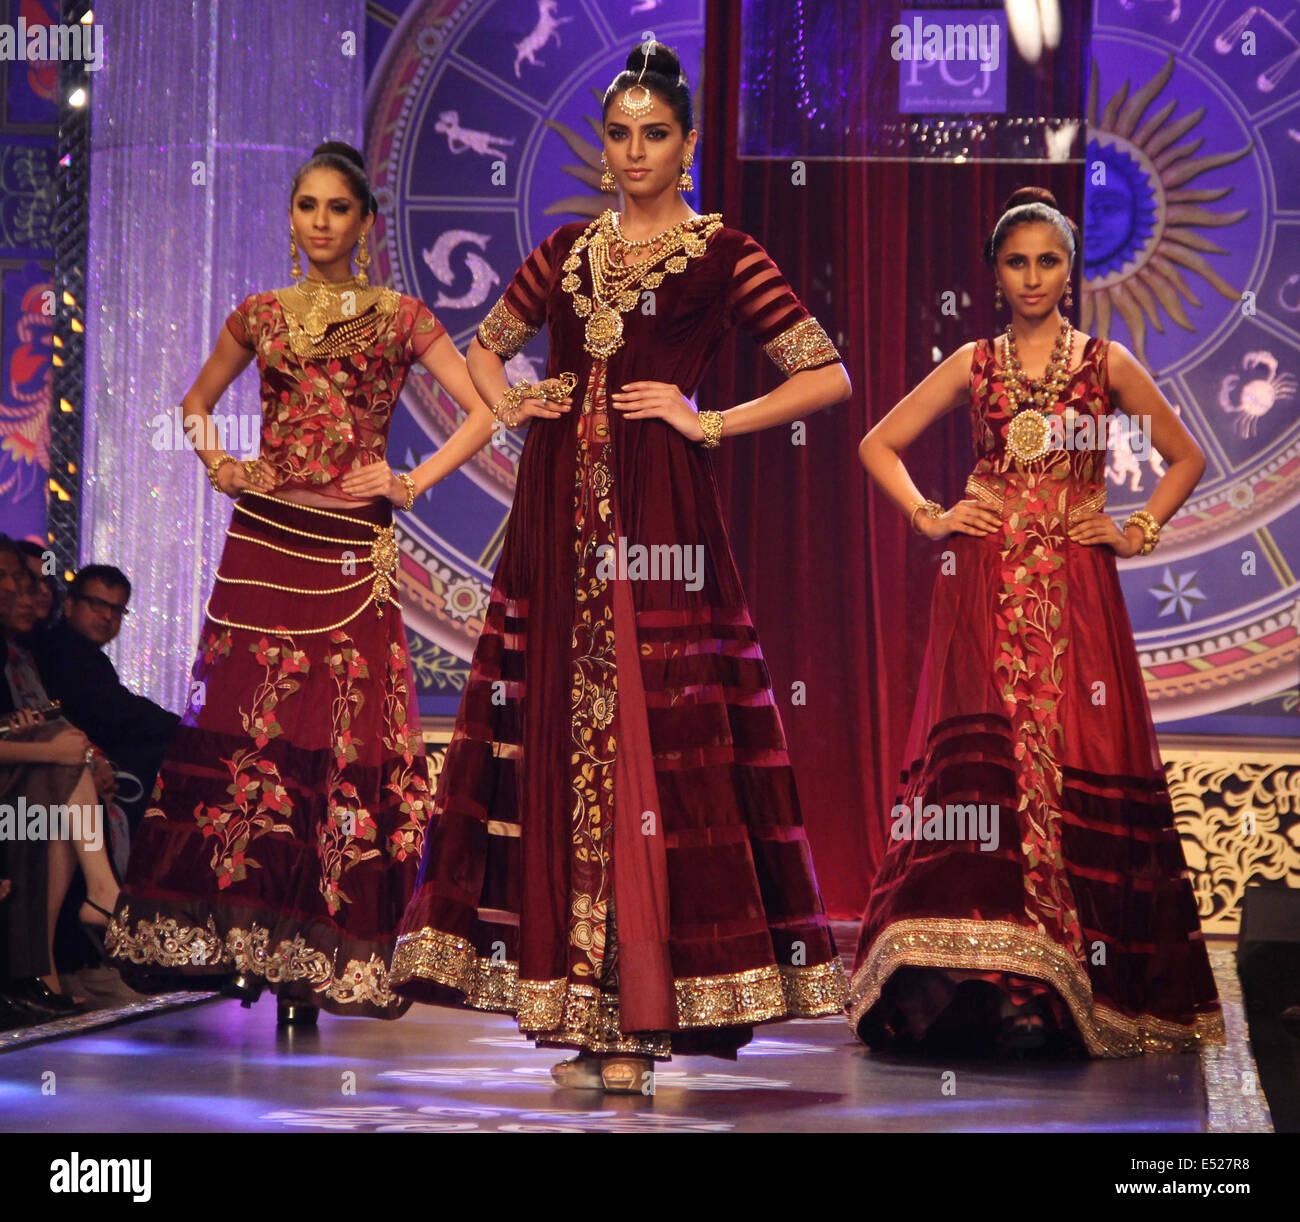 Mumbai, India. 17th July, 2014. Models display jewellery collections of a designer during the Grand Finale of India International Jewellery Week 2014 in Mumbai, India, July 17, 2014. © Stringer/Xinhua/Alamy Live News Stock Photo